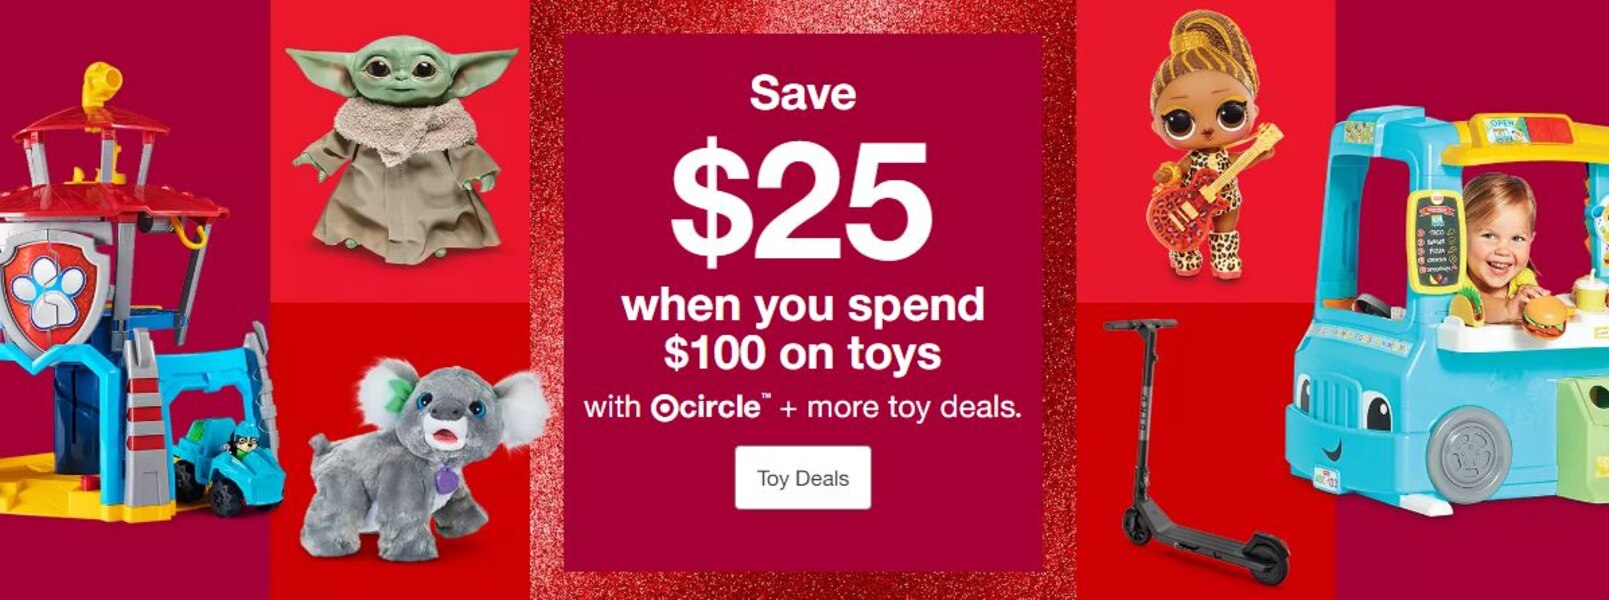 Target: 25% off Toys with Target Circle - wide 7